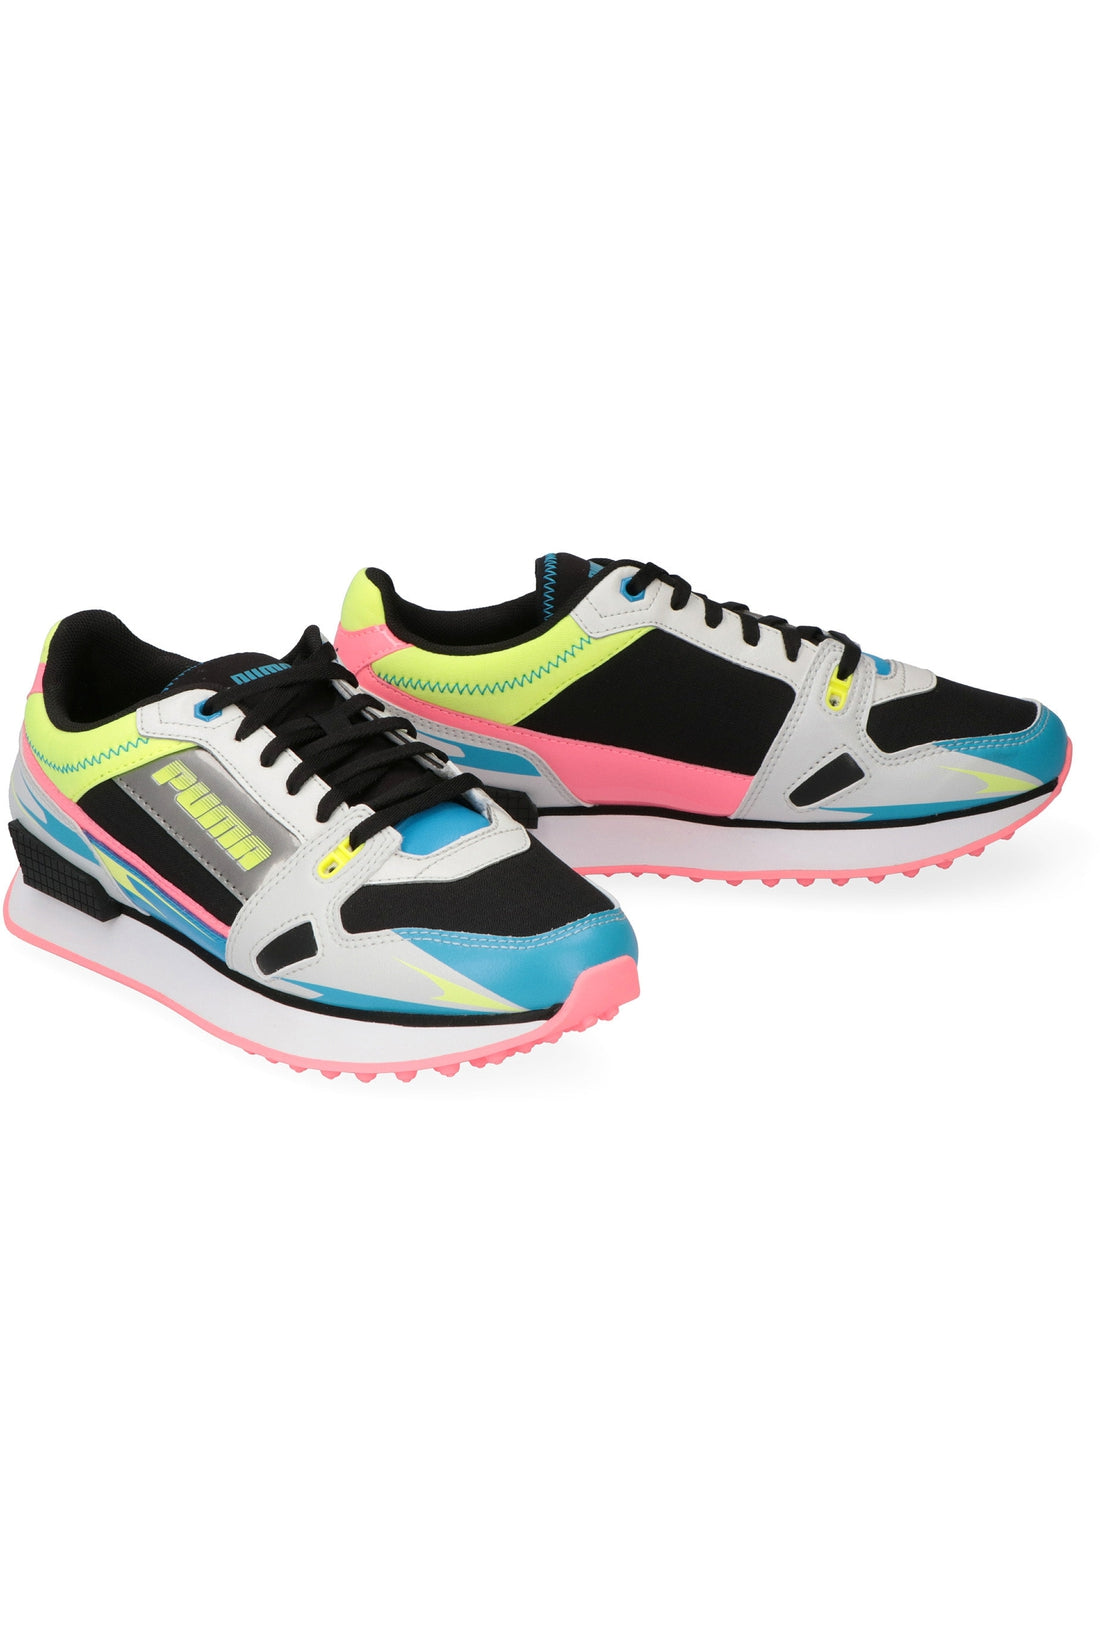 Puma-OUTLET-SALE-Mile Rider Sunny Getaway sneakers-ARCHIVIST